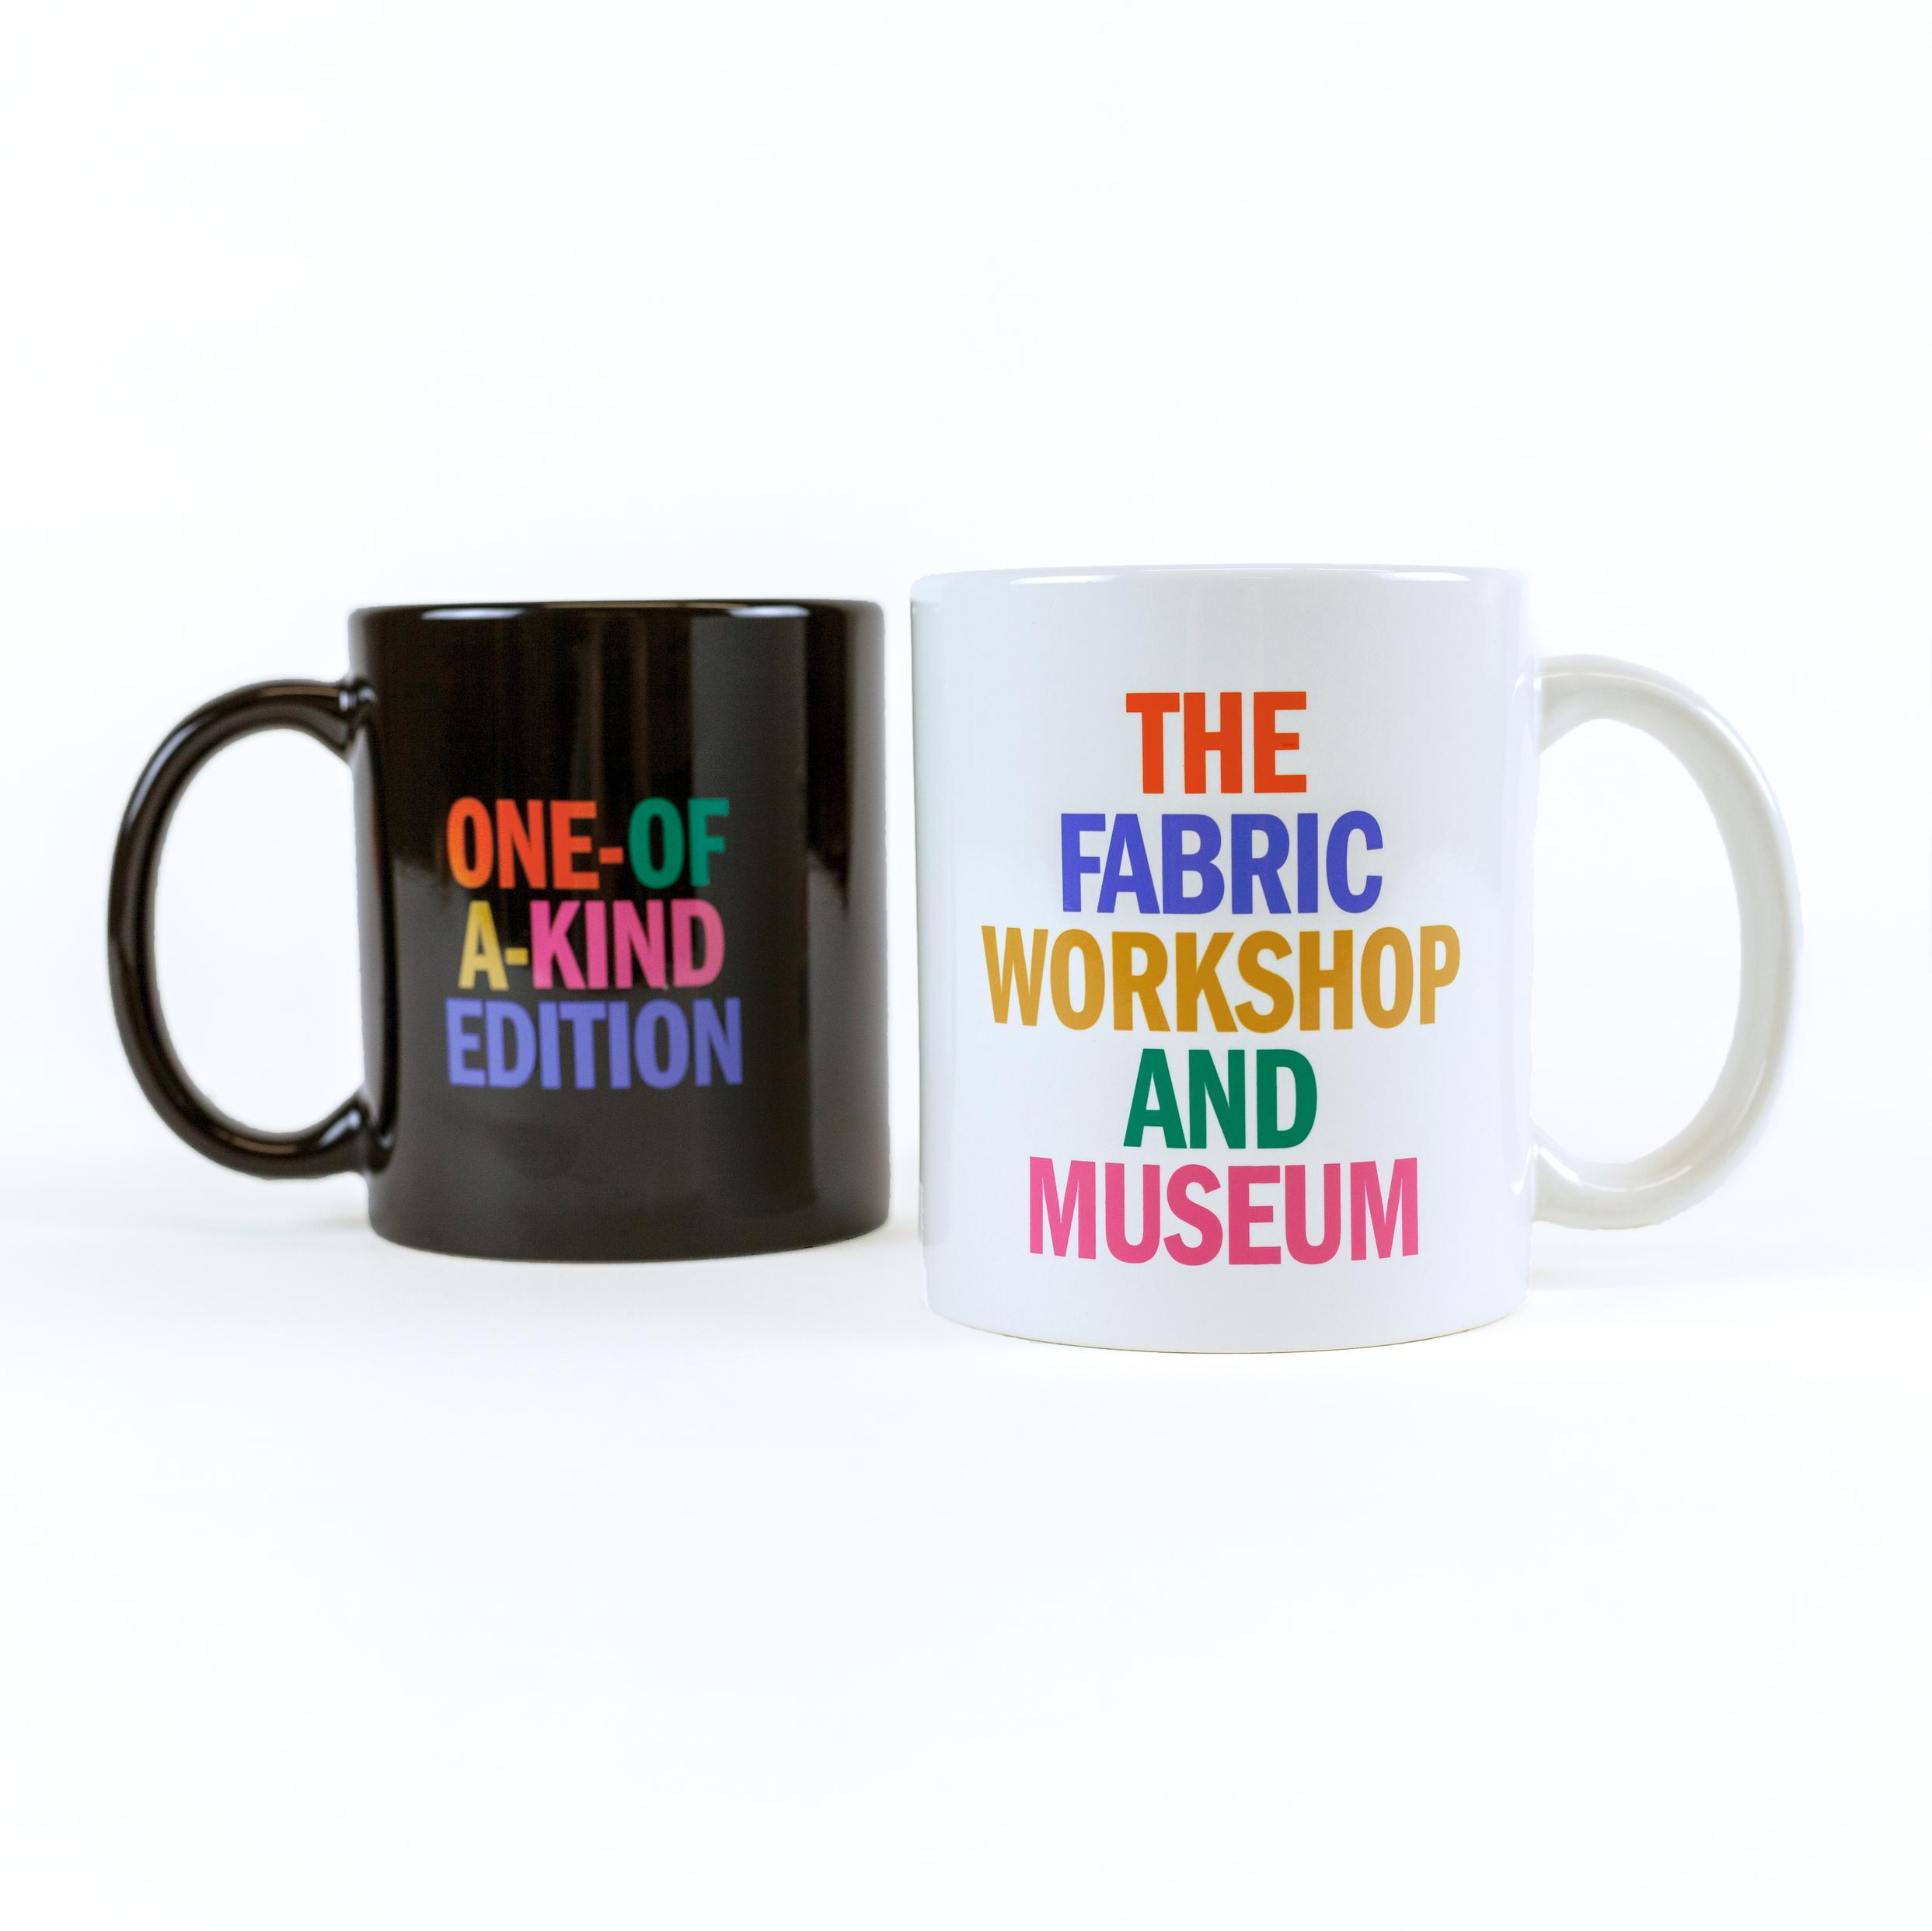 Two mugs sit against a white background. On the right is the cream version of the mug which reads "The Fabric Workshop and Museum" and to the left is the black version of the mug. The black mug shows the text on the reverse side, which reads "One-of-a-kind edition". Each word is a different color, red, blue, golden yellow, green, and pink.